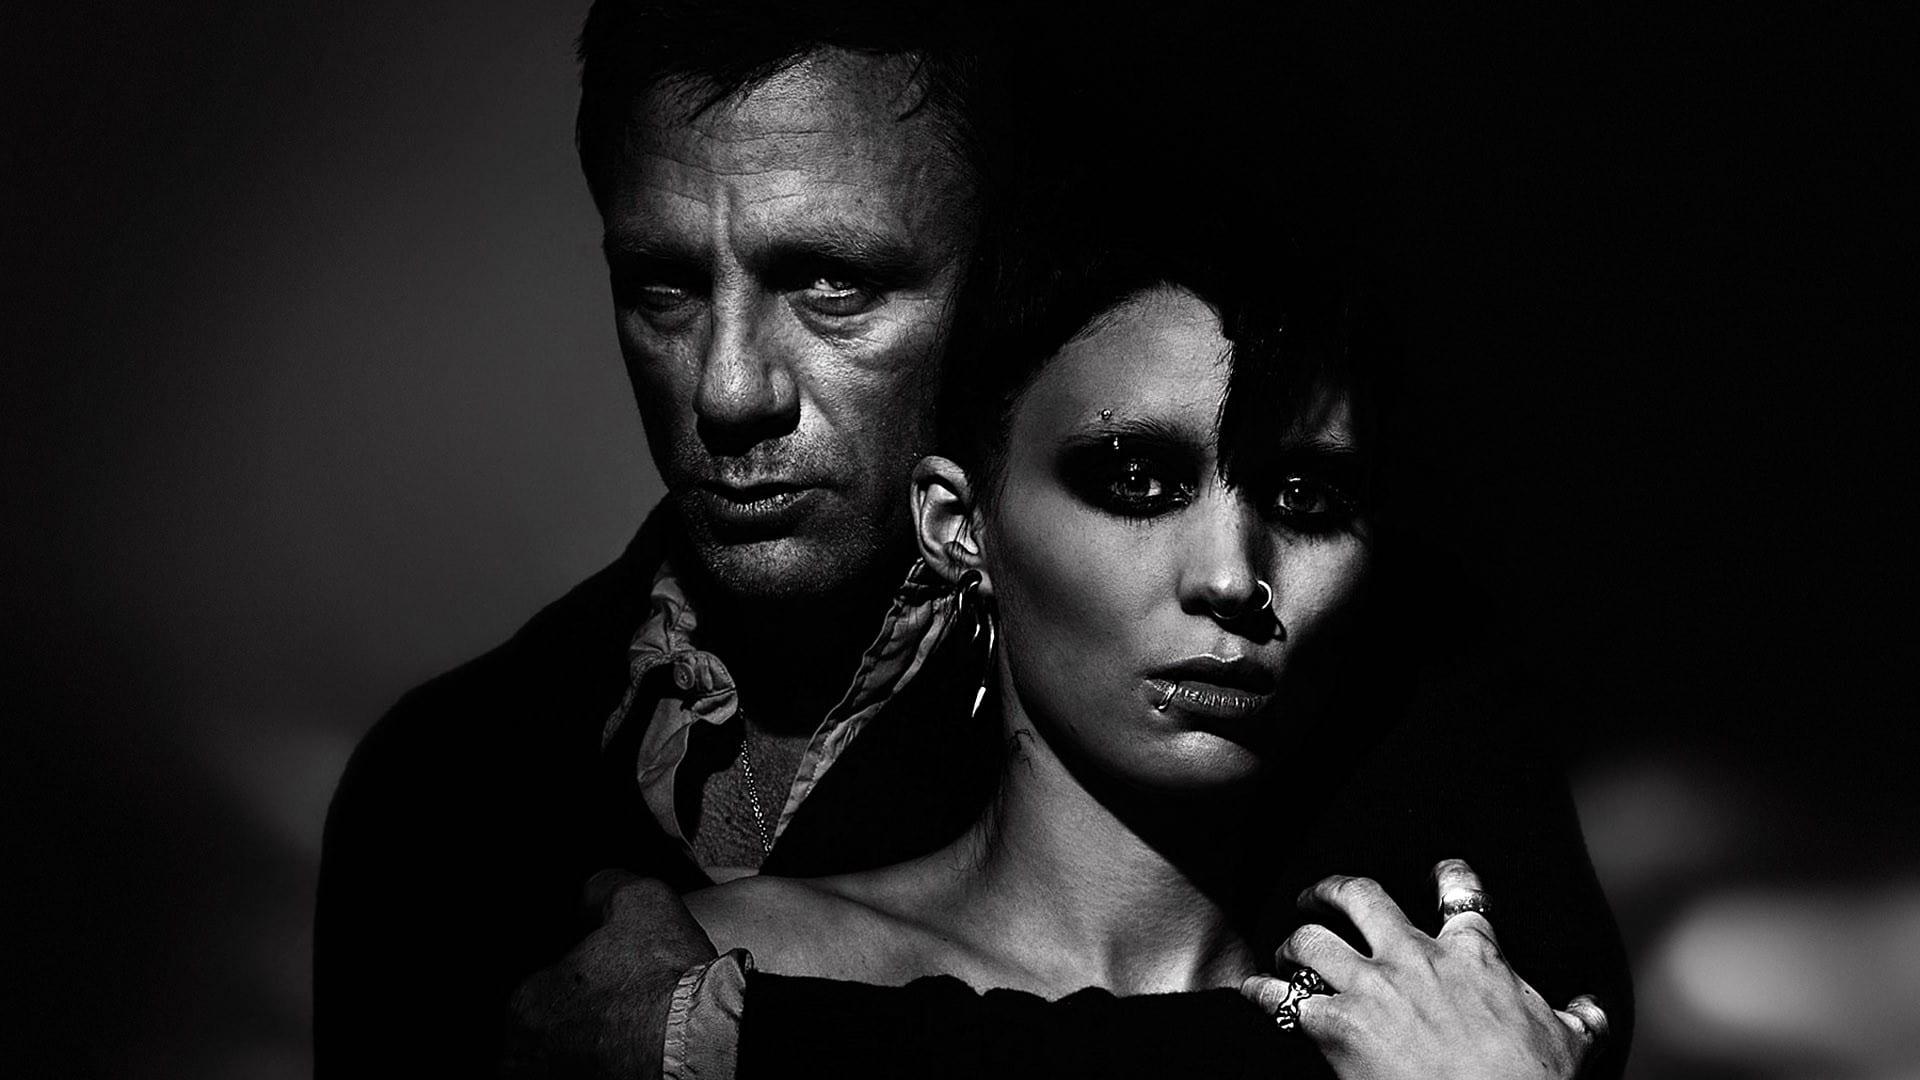 Backdrop Image for The Girl with the Dragon Tattoo